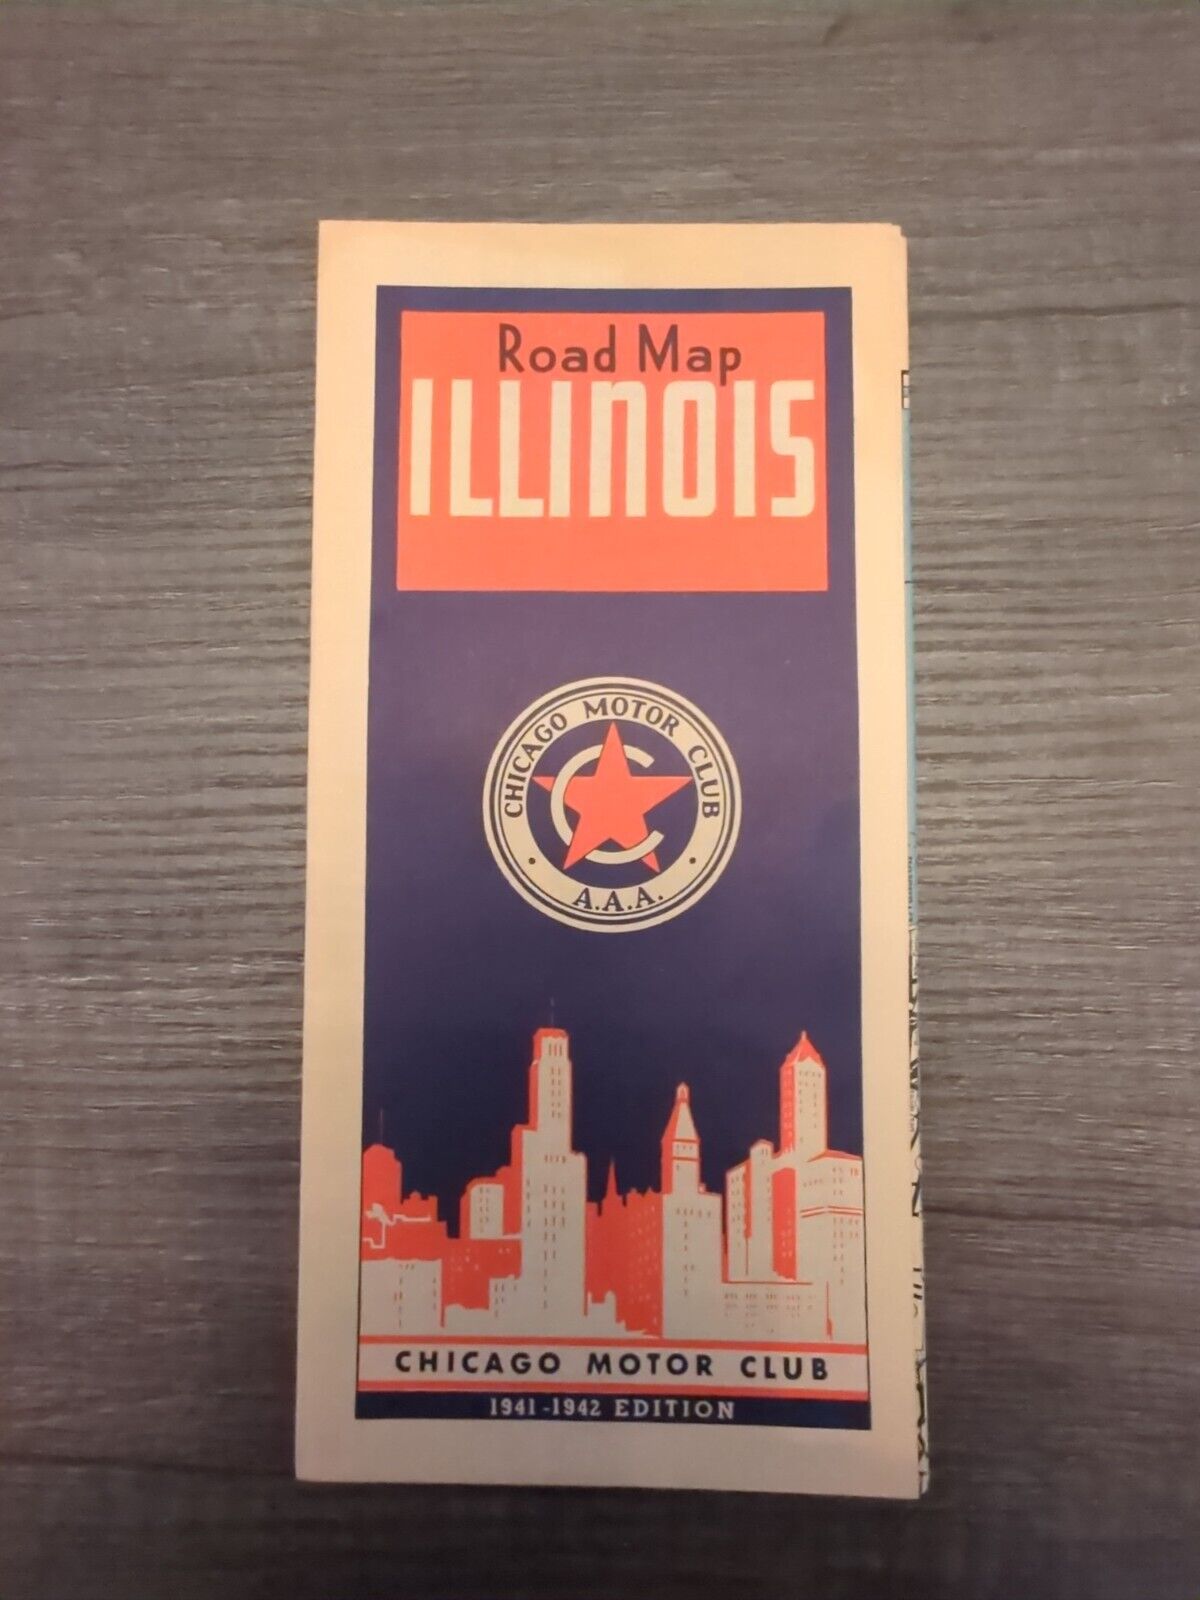 Illinois Road Map Courtesy of AAA Chicago Motor Club 1941-1942 Edition